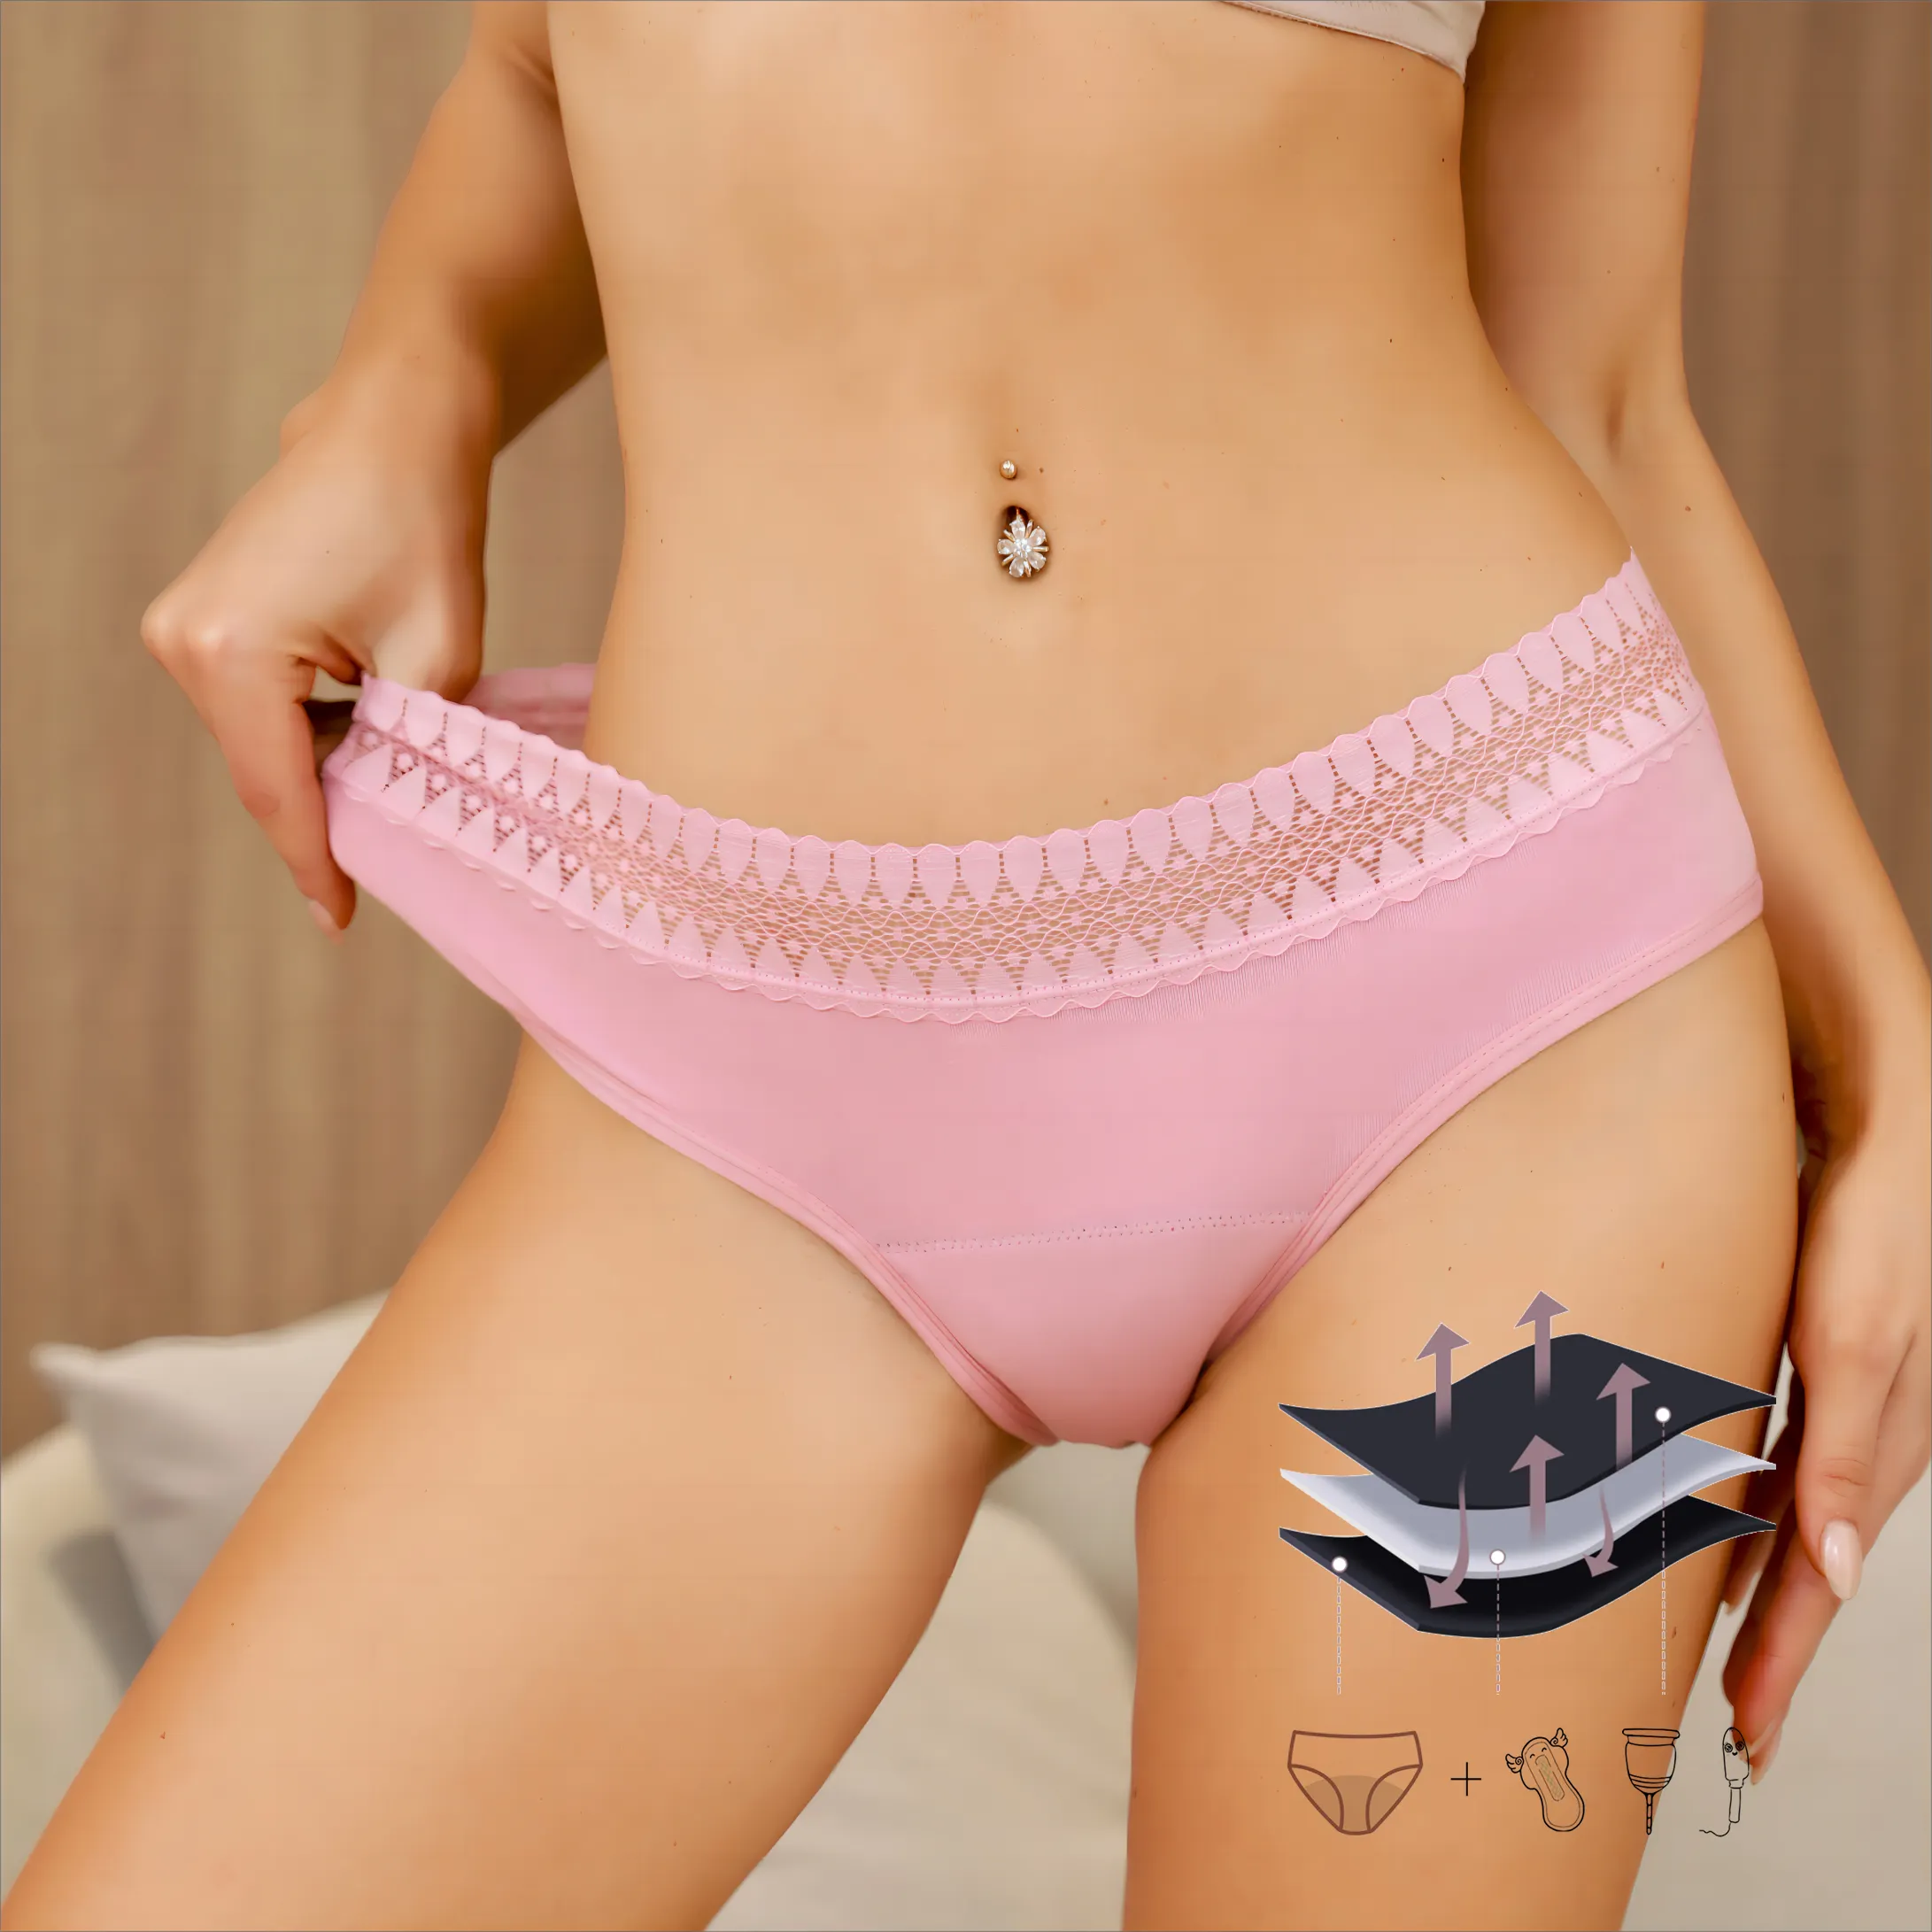 Intiflower PL02 High Quality 4 Layers Cotton Lace Period Panties Culotte Breathable Menstrual Underwear Panties